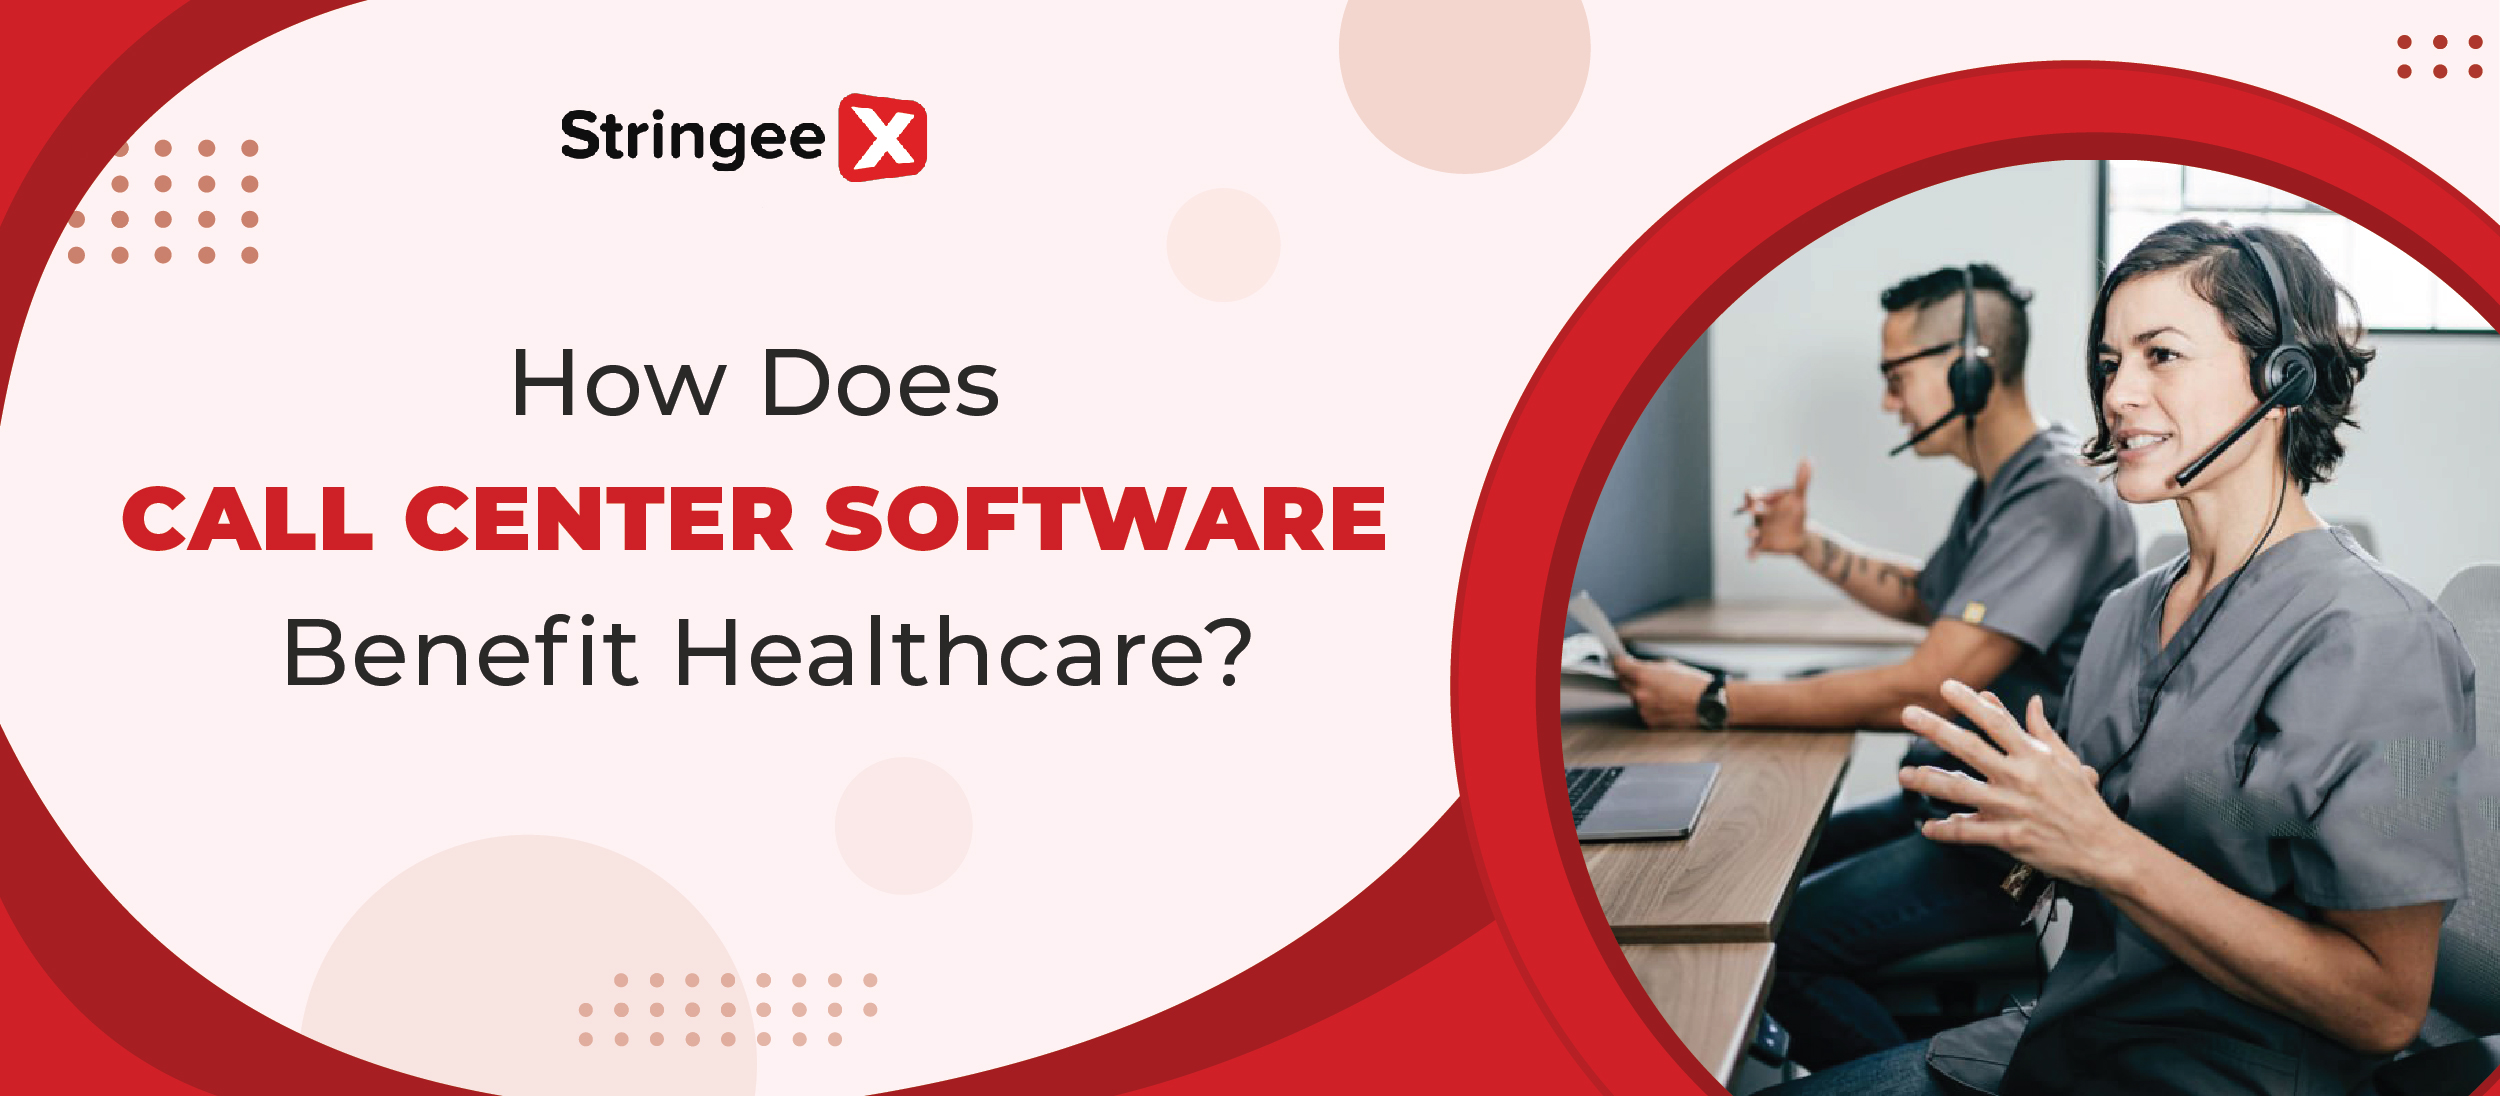 How Does Call Center Software Benefit Healthcare?